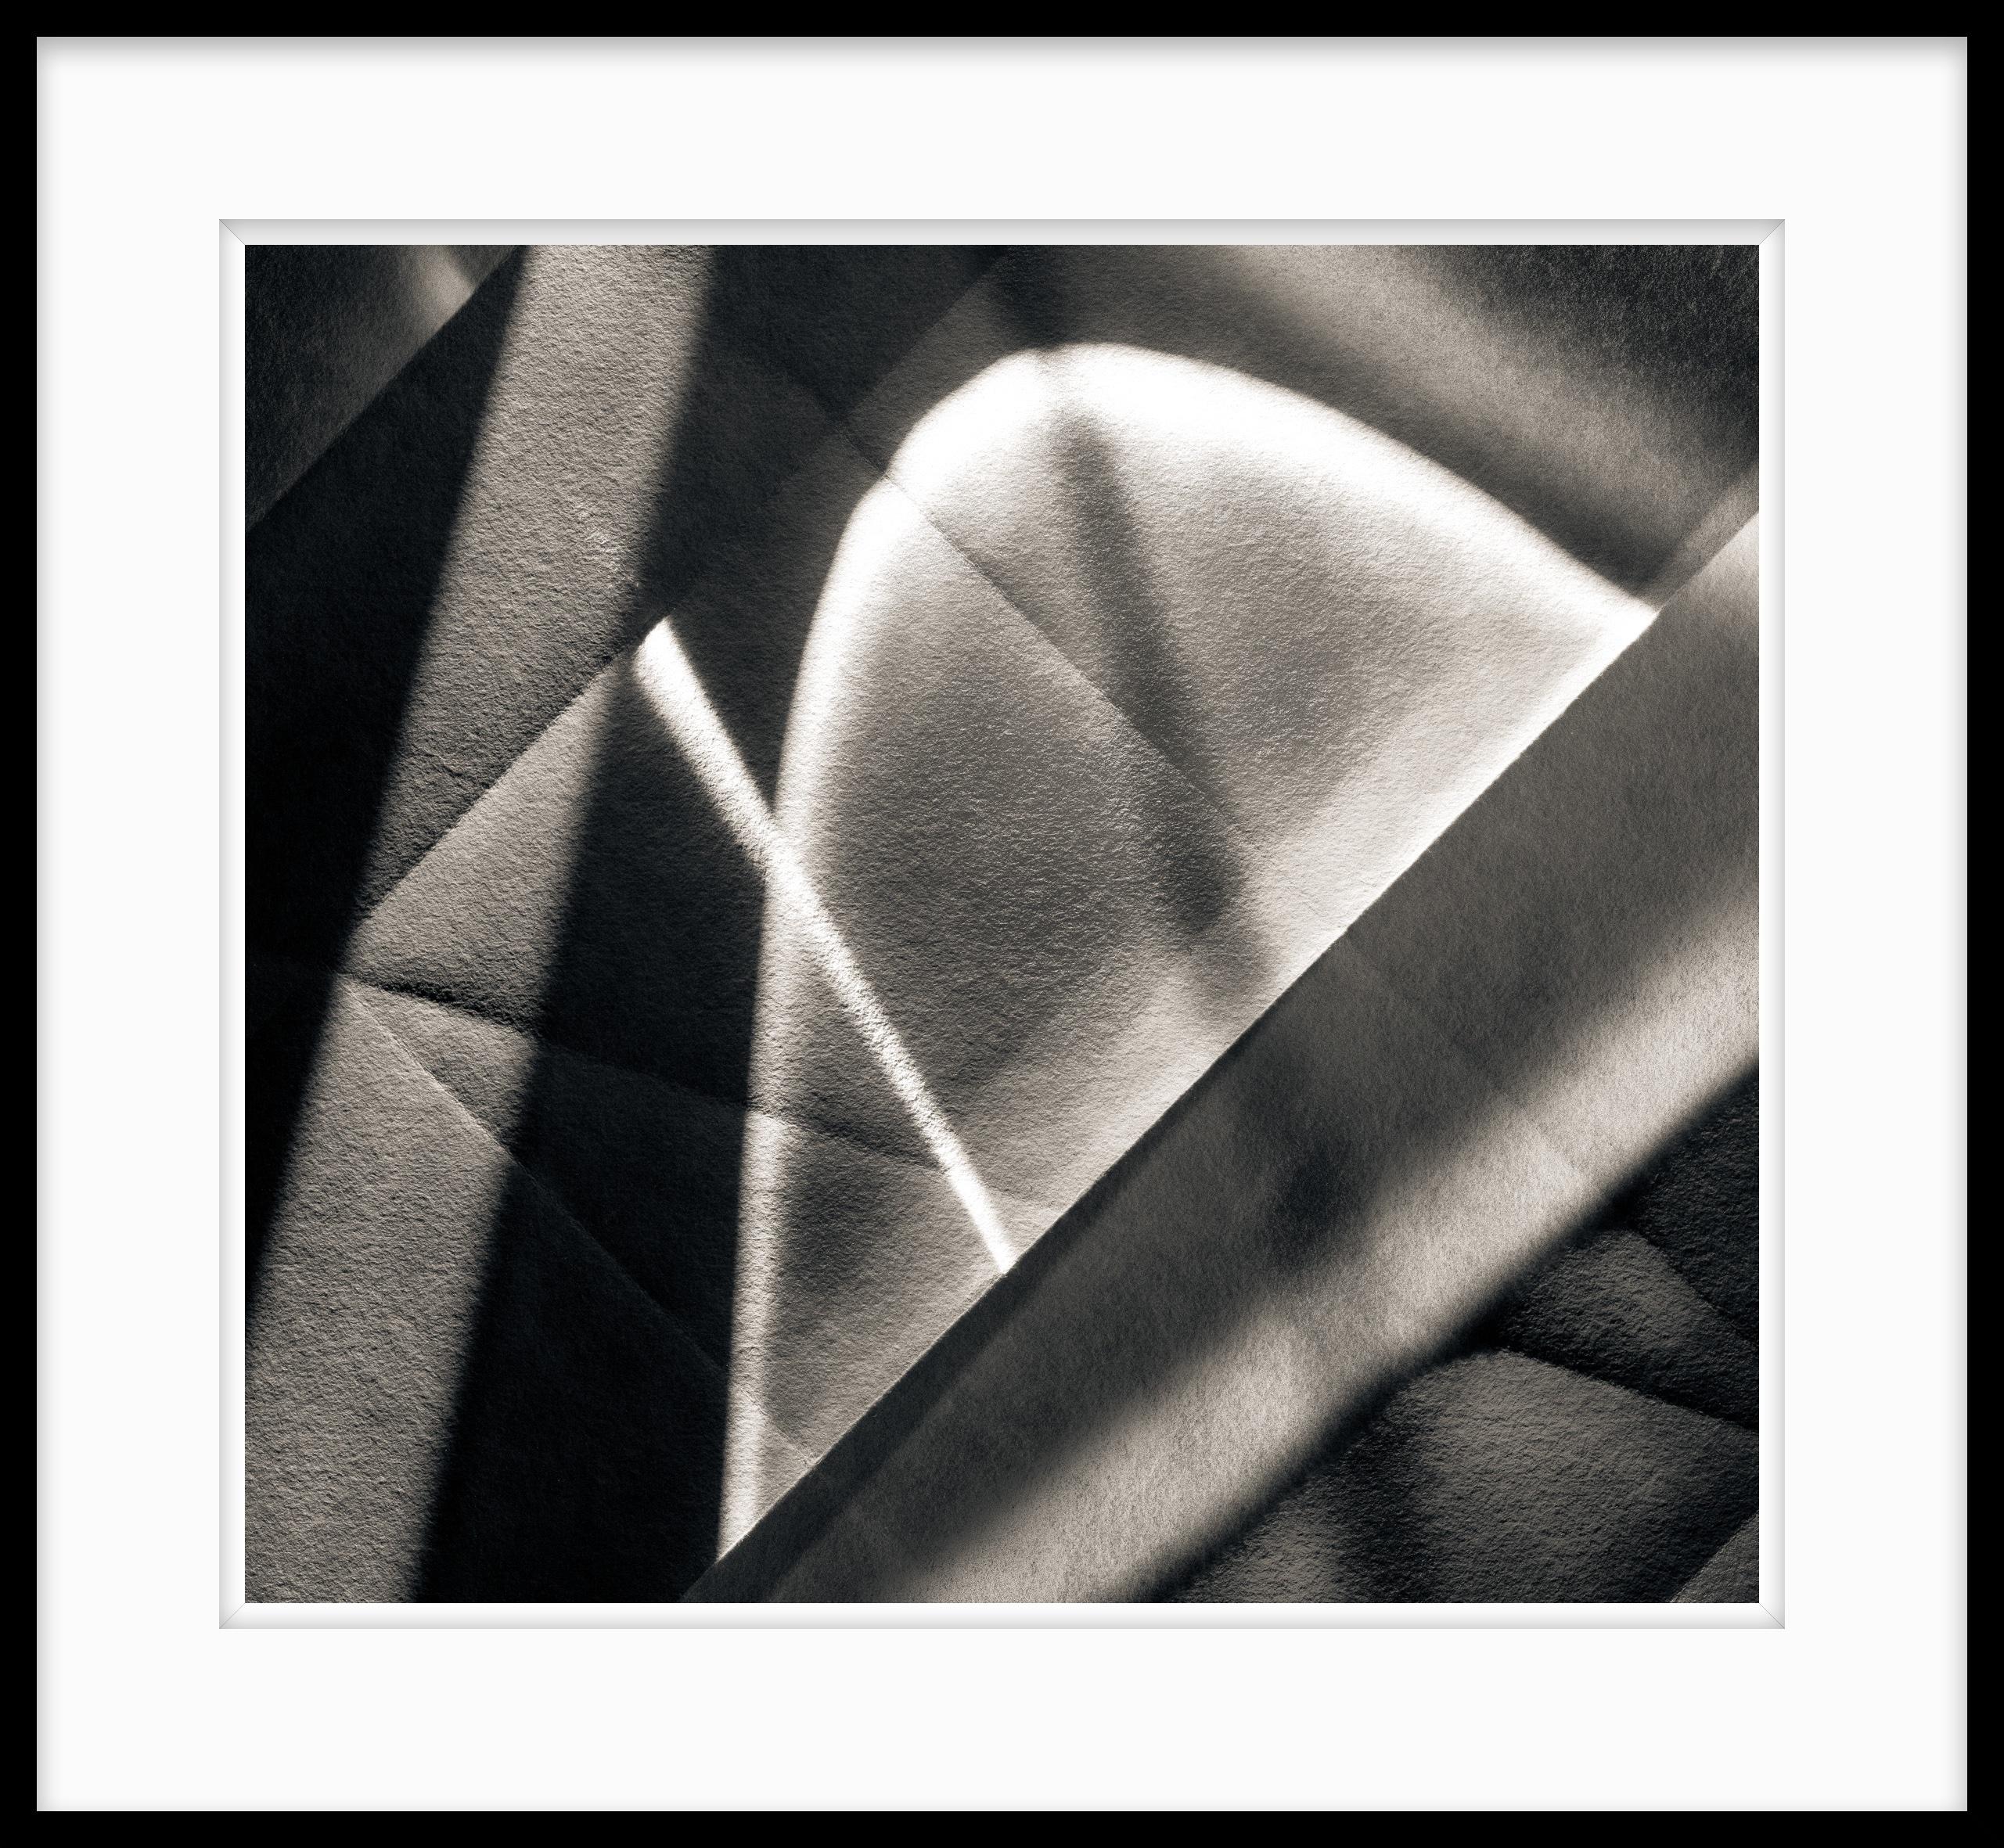  Limited Edition Black and White Photograph - Origami Folds #2 For Sale 1